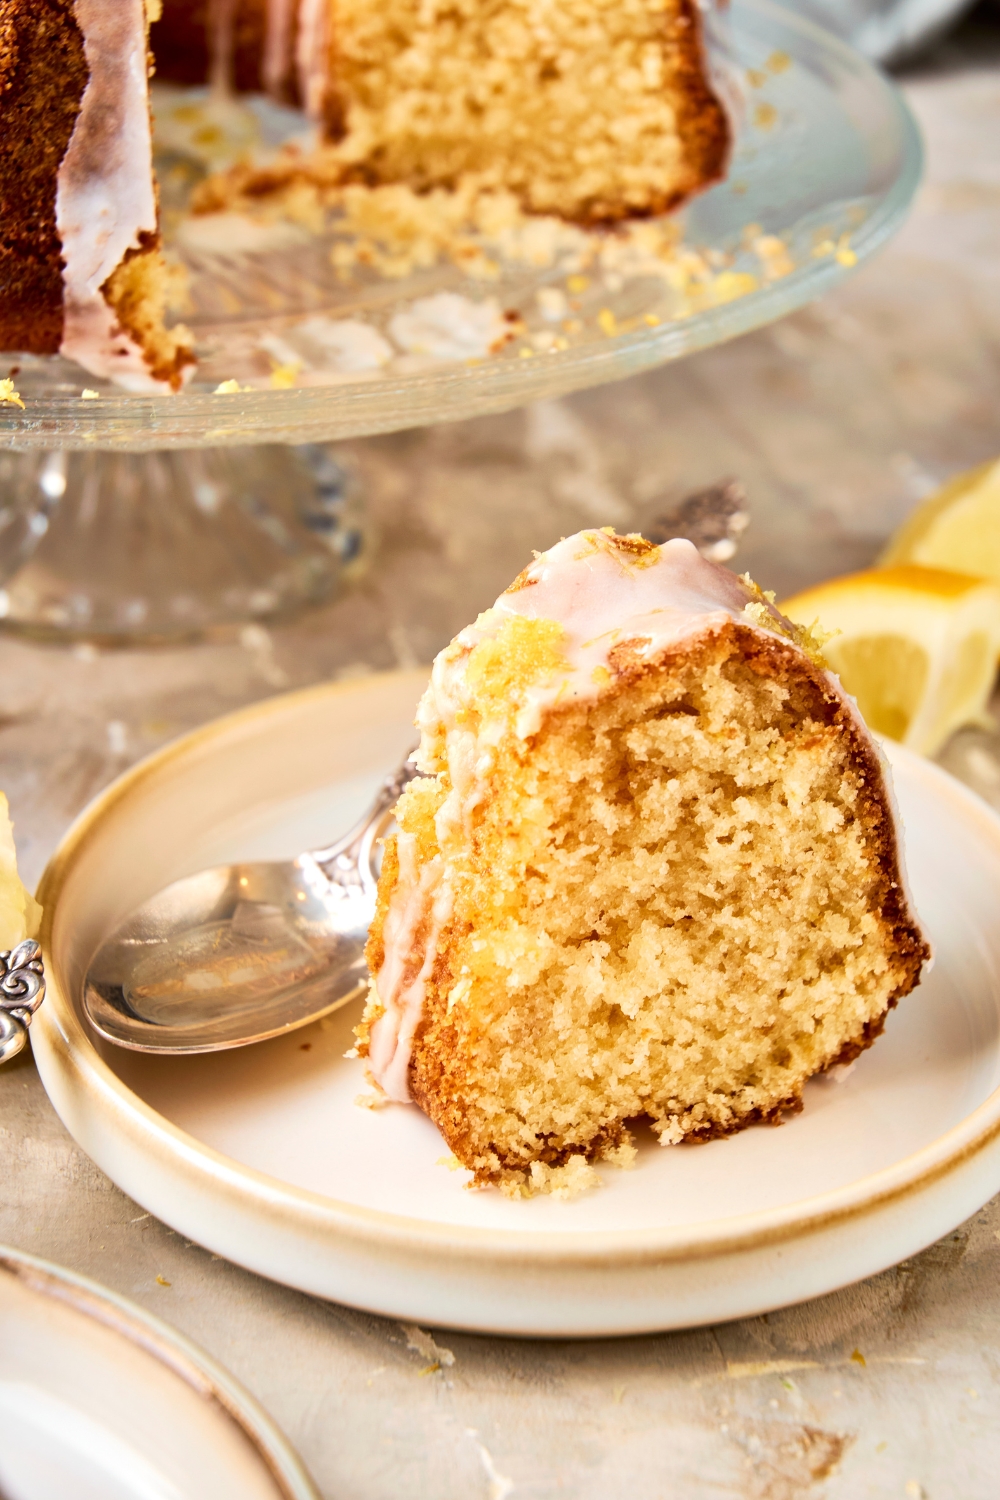 A small plate with a slice of lemon bundt cake with icing.